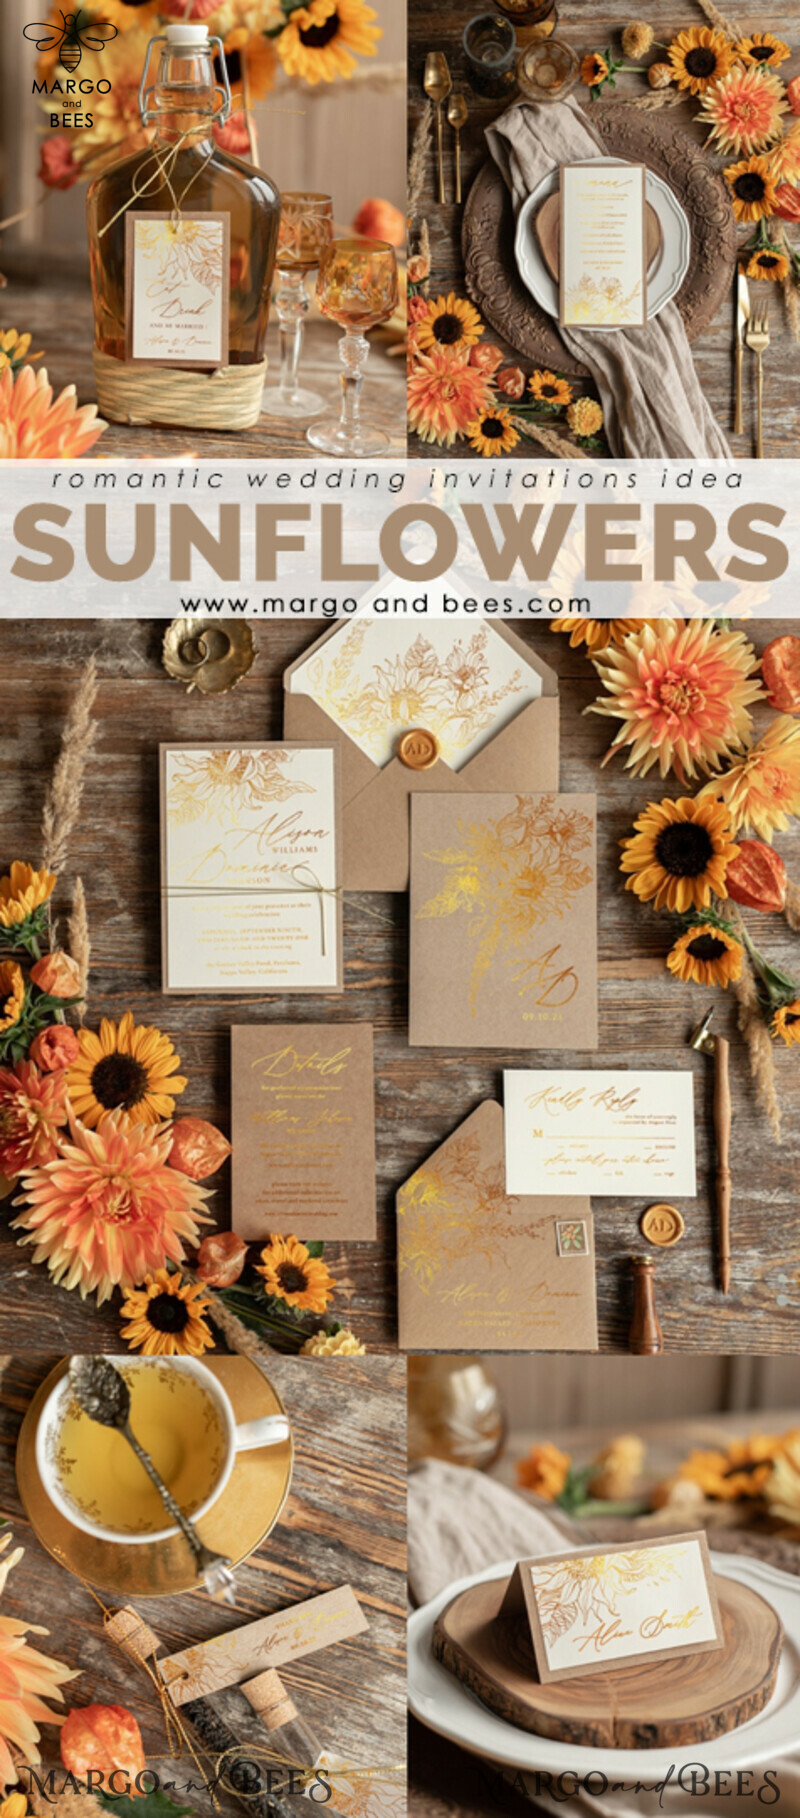 Elegant Rustic Glam Wedding Invitations with Bespoke Vintage Touch and Golden Shine: Introducing our Gold Glitter Sunflower Wedding Invites-1